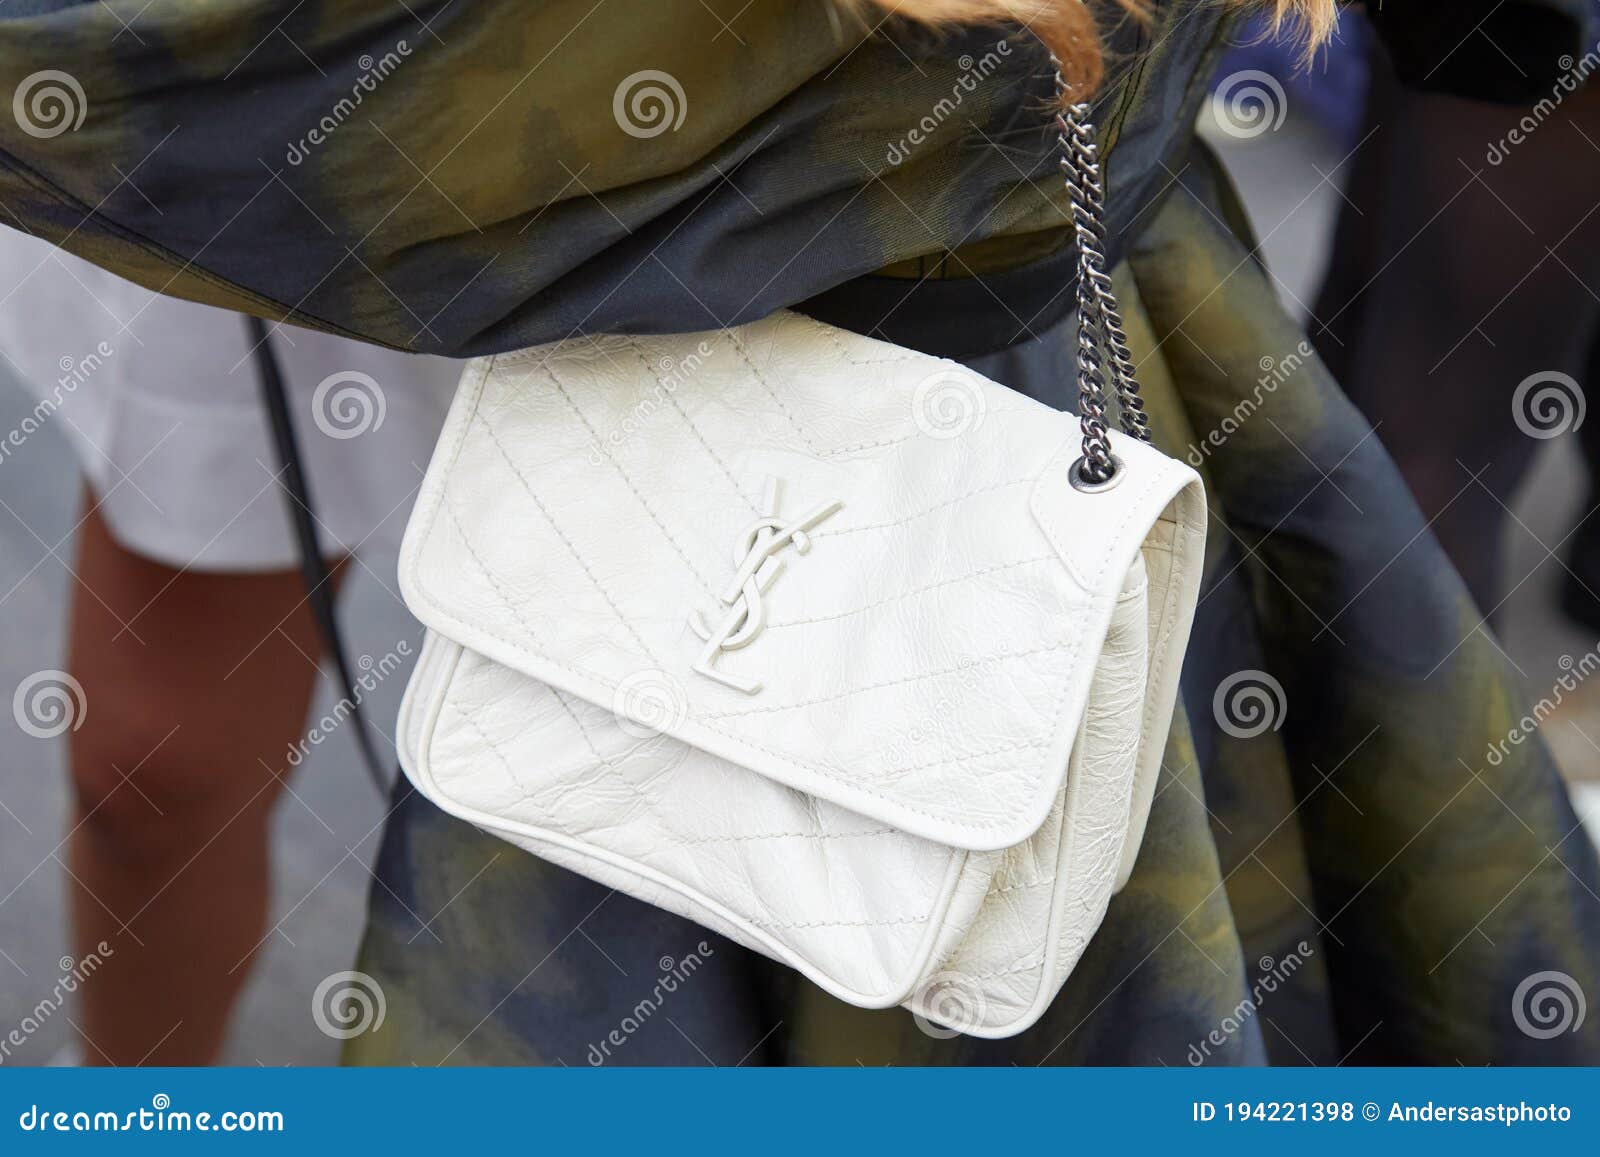 Woman with pink Louis Vuitton leather bag and blue floral trousers before  Salvatore Ferragamo fashion show, Milan Fashion Week, 2017 Stock Photo -  Alamy